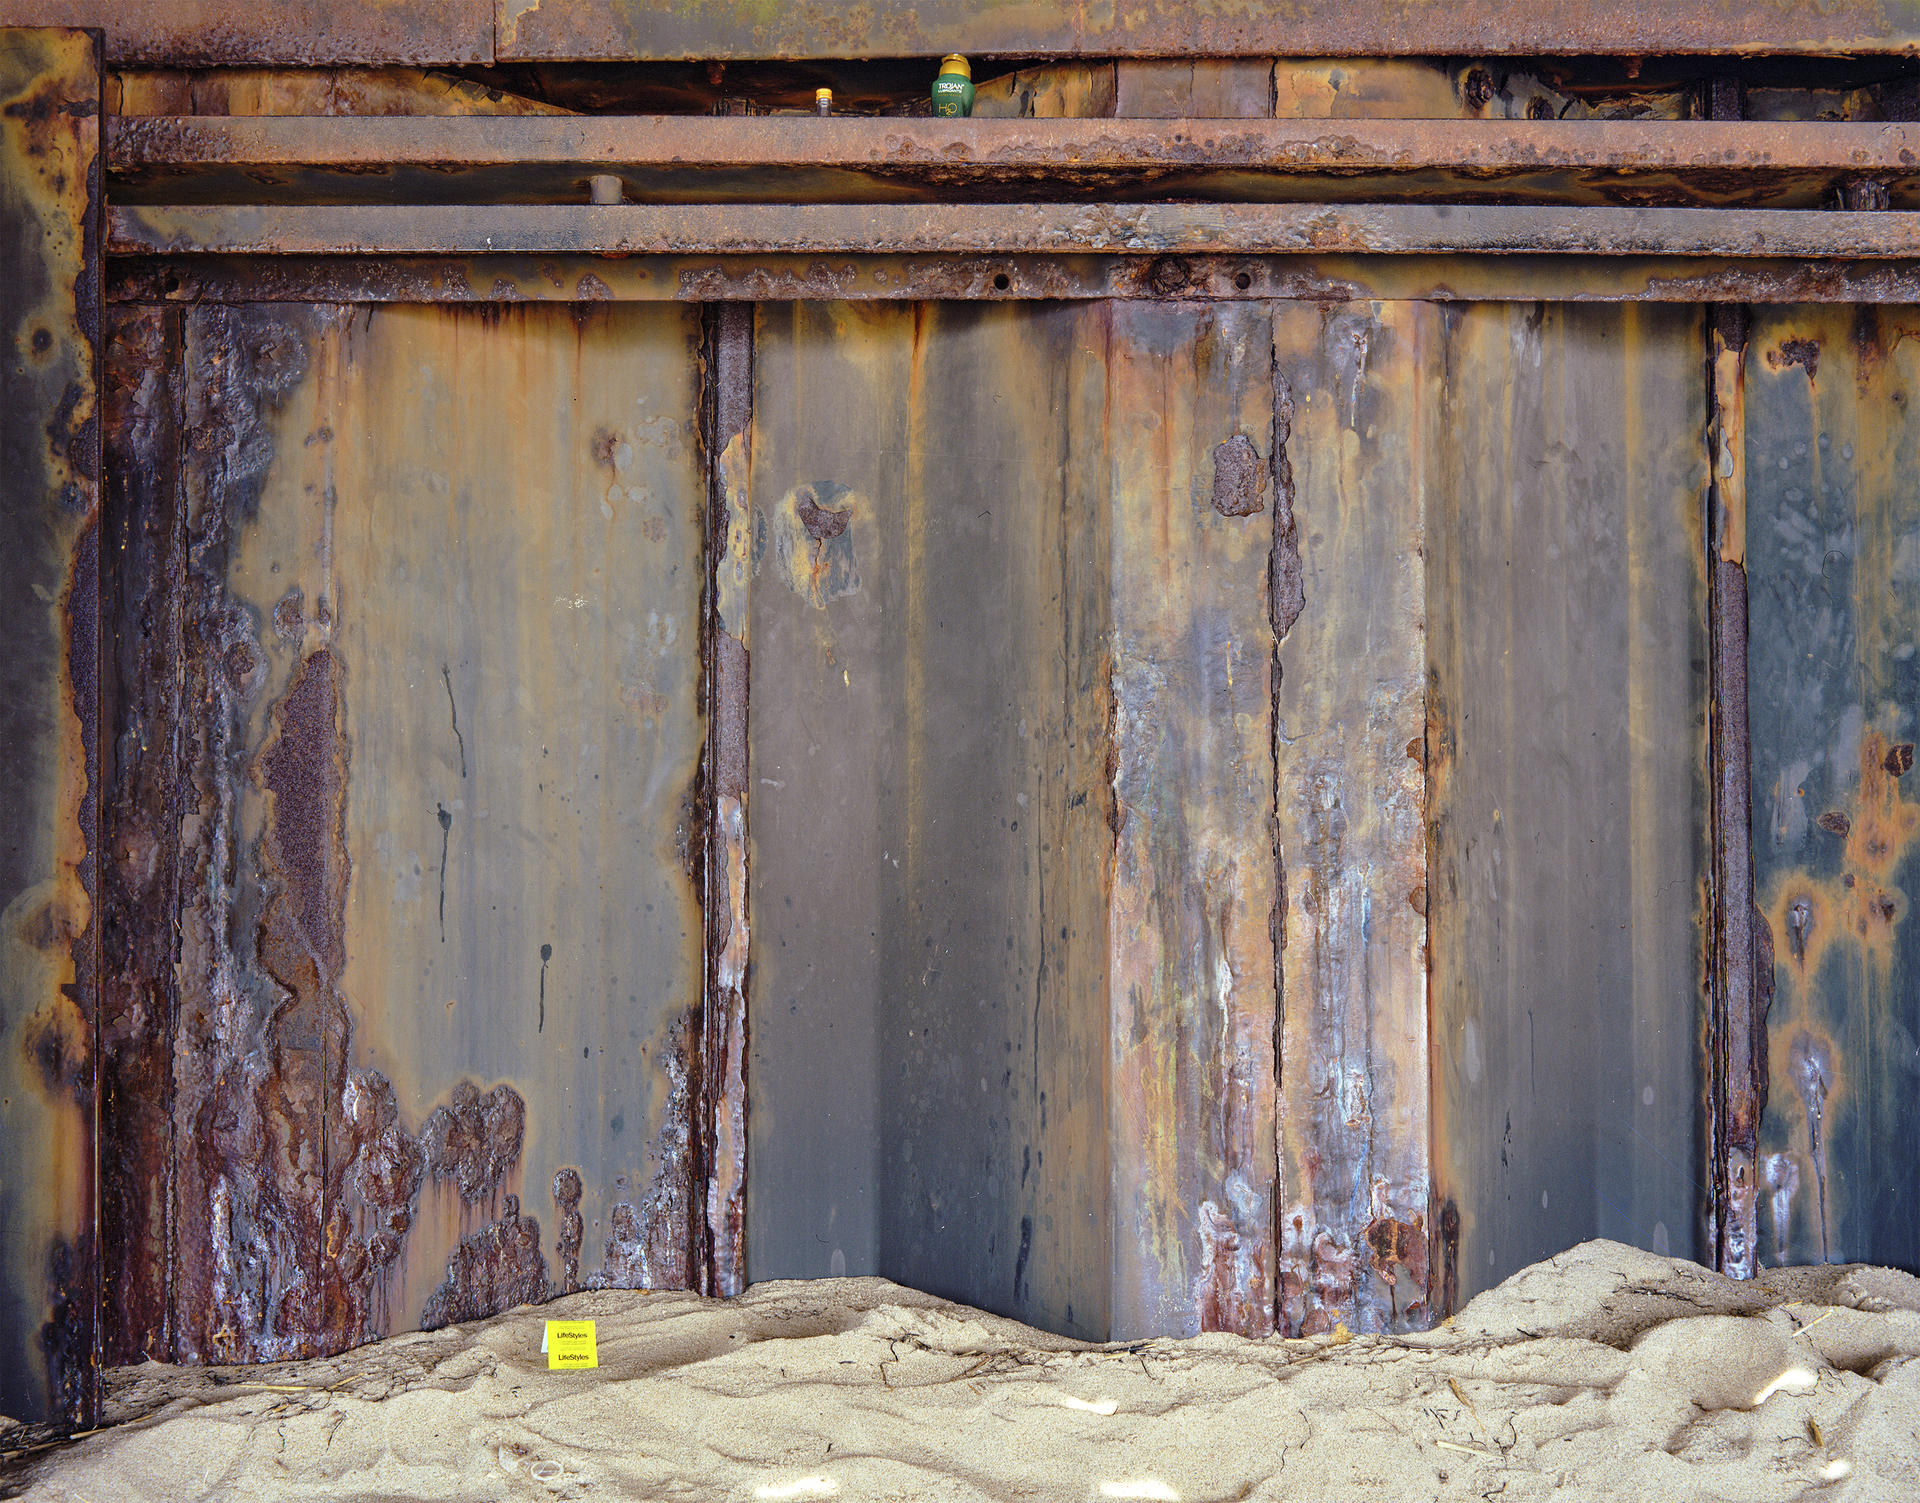 a landscape photograph showing a salt rusted wall with a magnum condom wrapper in the sand. 